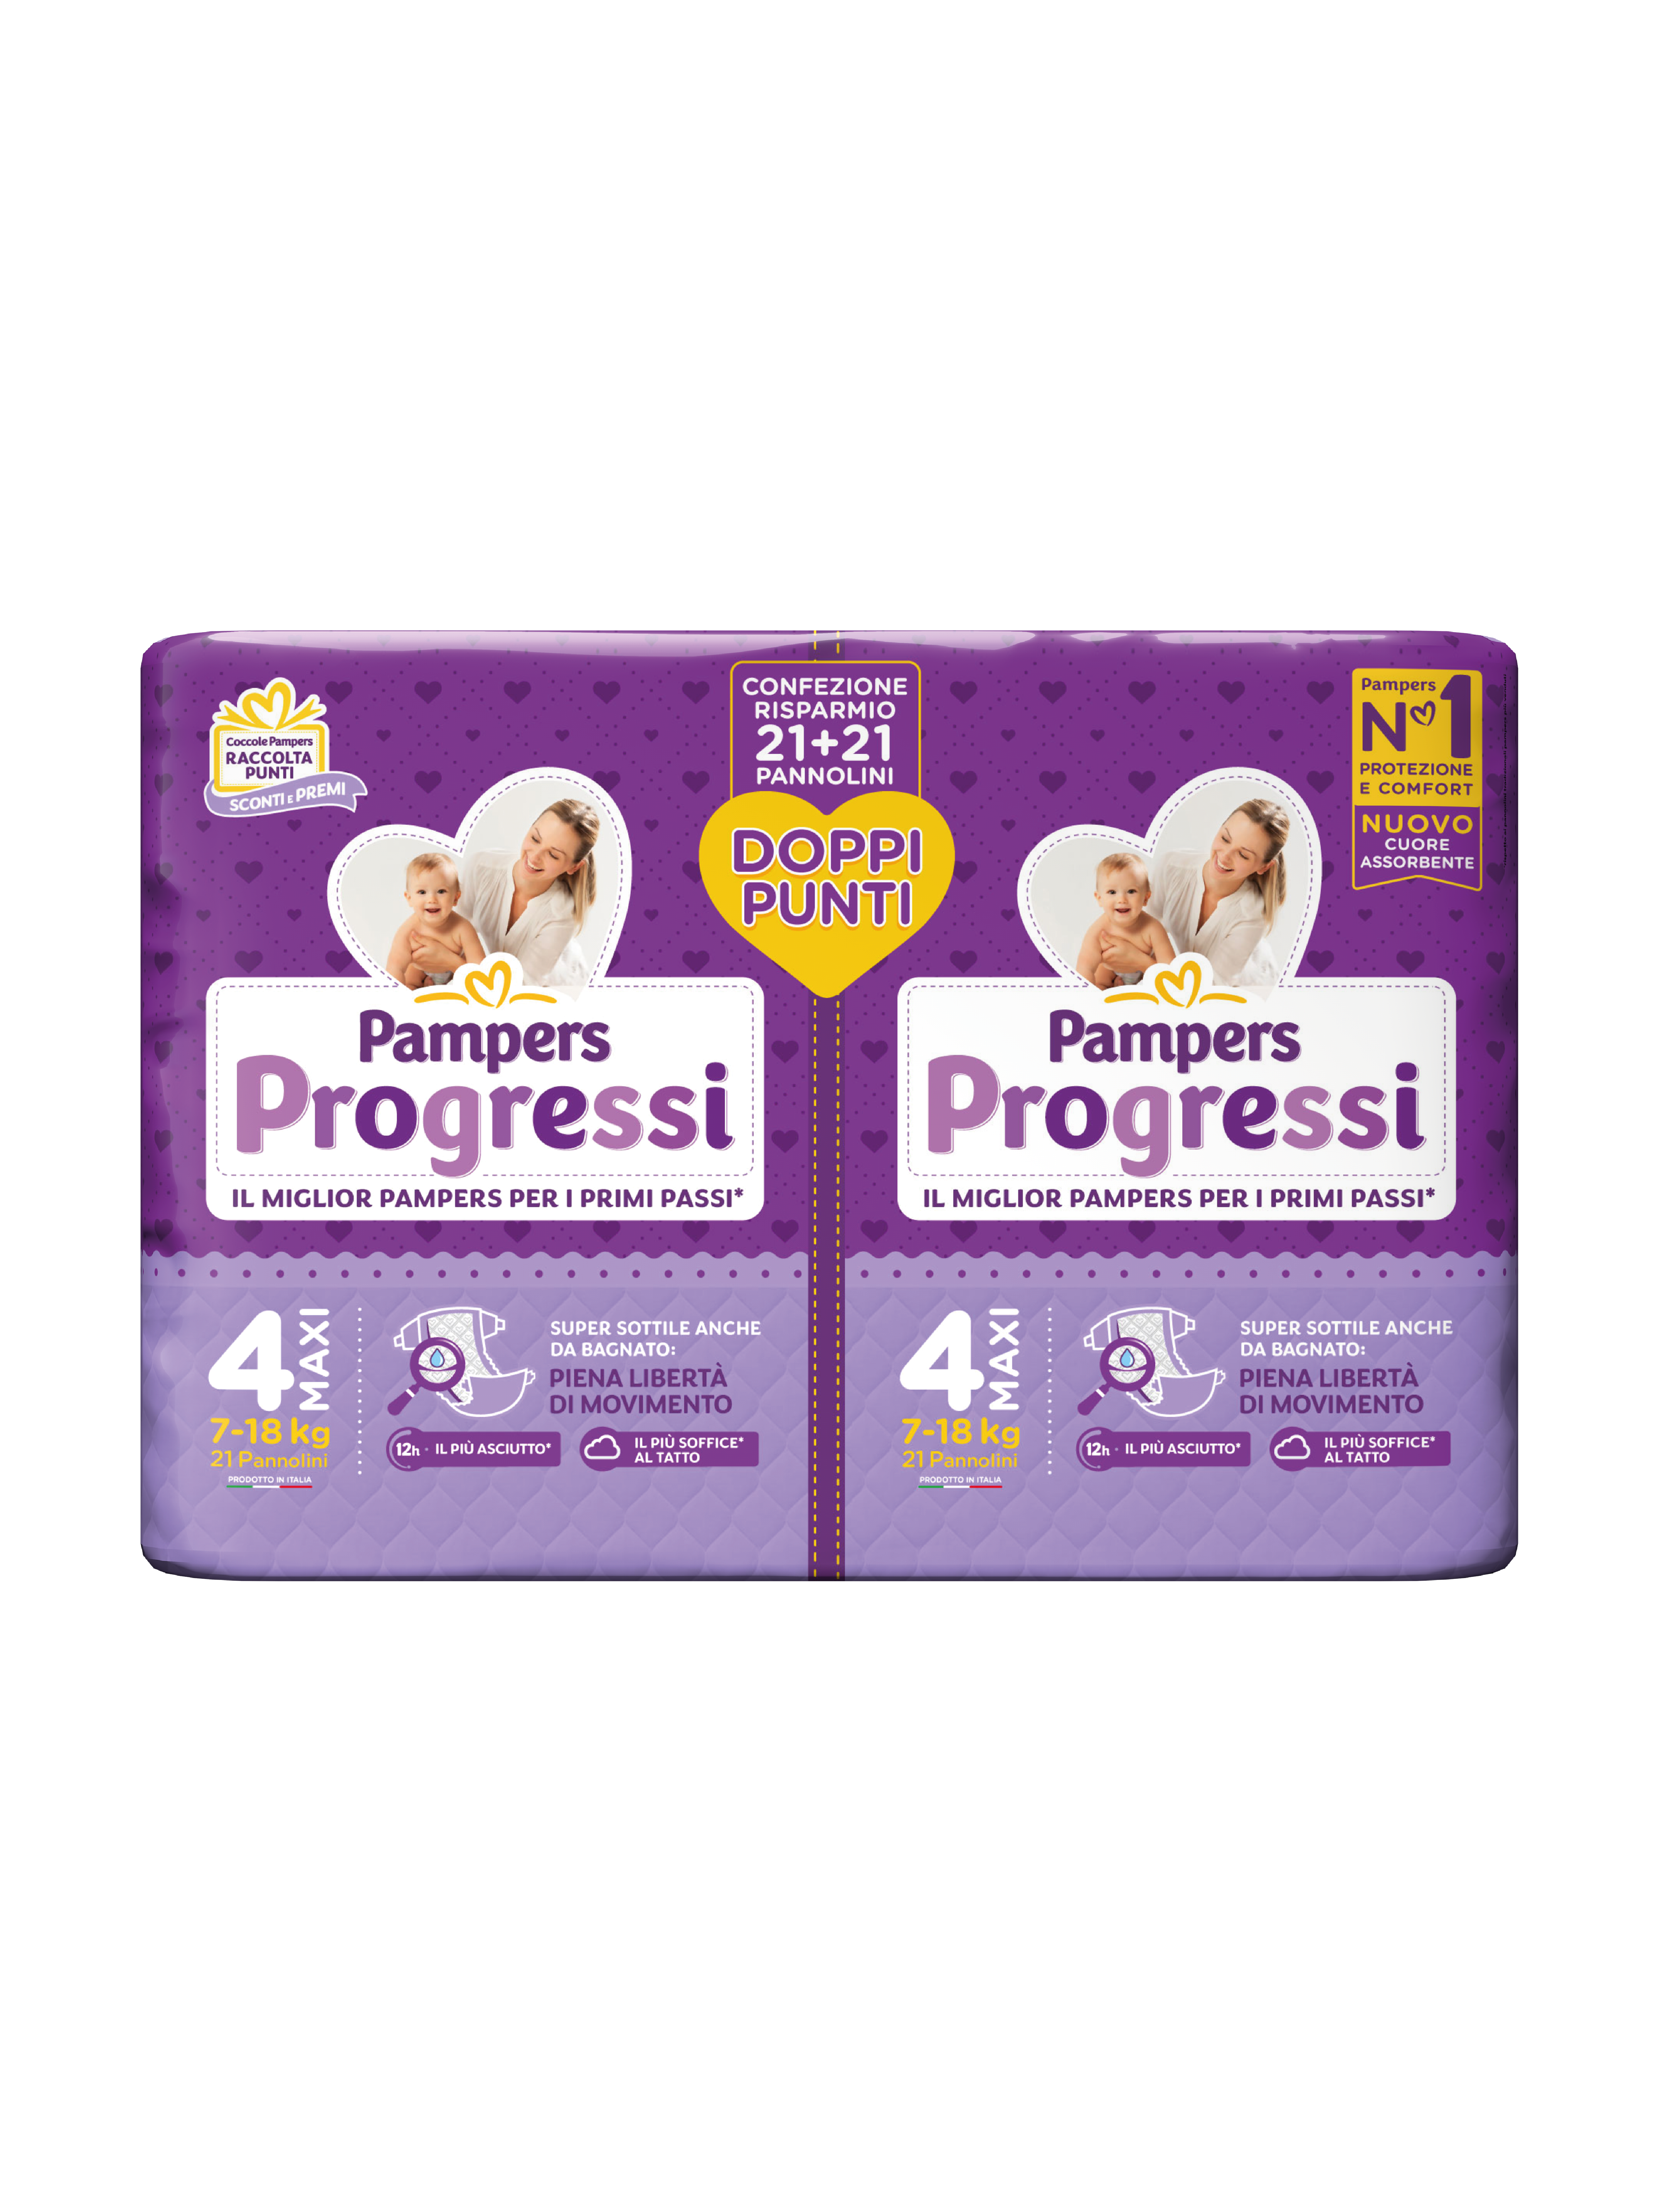 Pampers progressi maxi x21+21 - Pampers